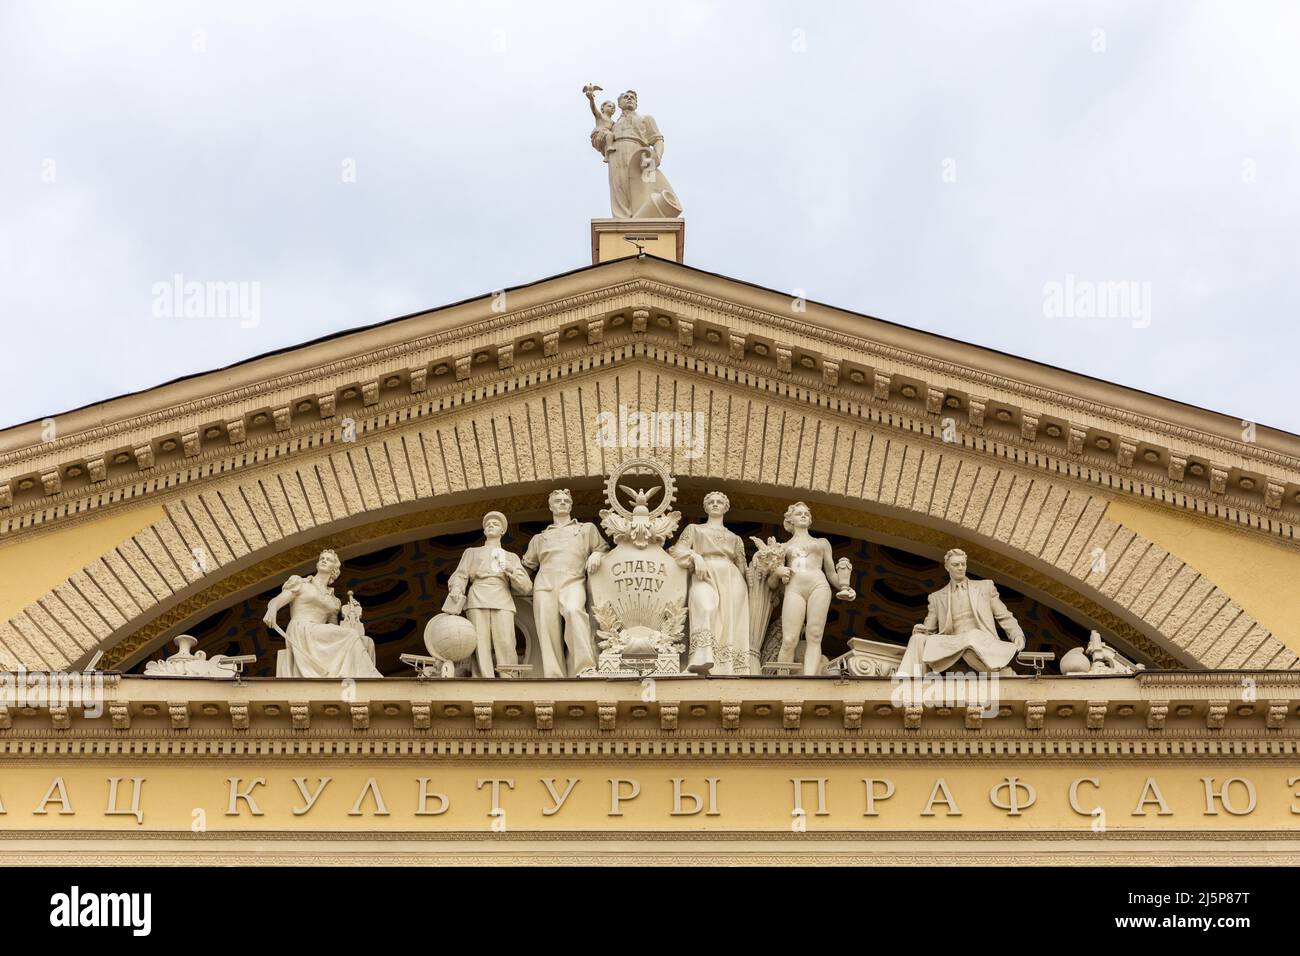 Minsk, Belarus, 04.11.21. Classical style pediment with workers sculptures, Trade Unions Palace of Culture building. Stock Photo